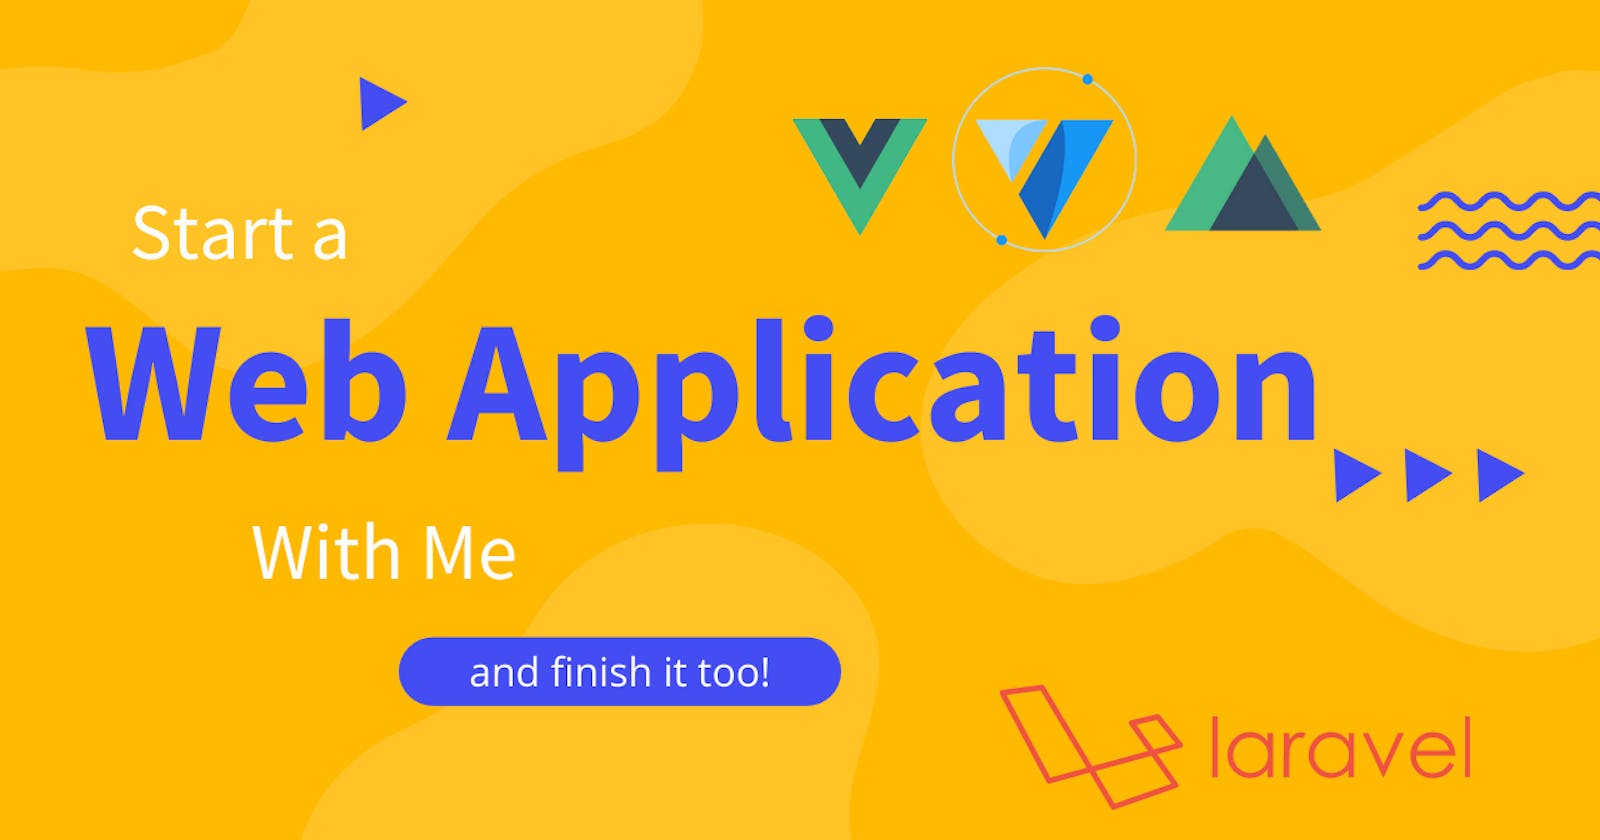 This is not your typical tutorial - Web Portal with Vue, Nuxt, Vuetify, Laravel, and Docker